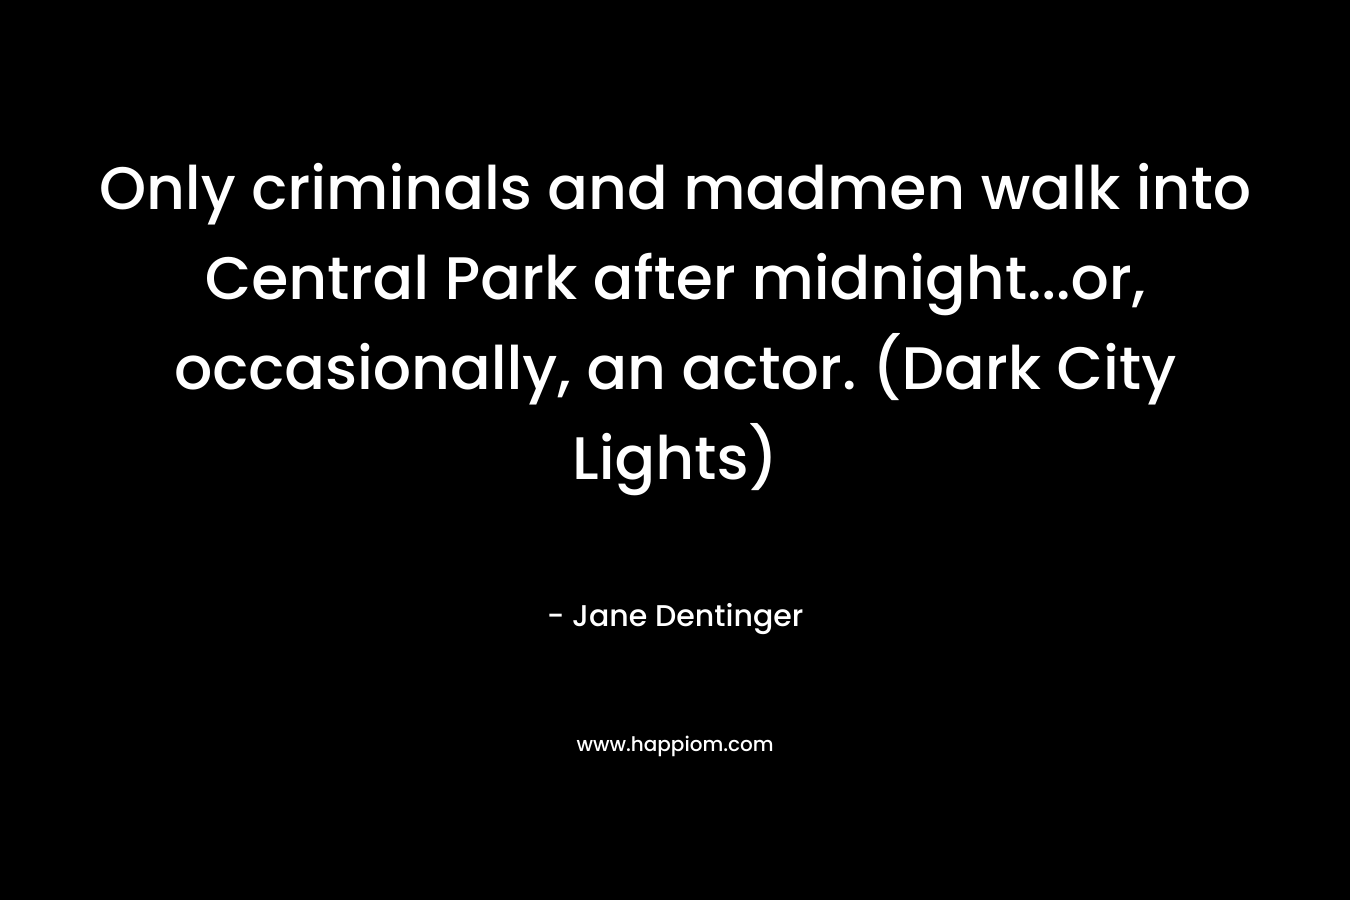 Only criminals and madmen walk into Central Park after midnight…or, occasionally, an actor. (Dark City Lights) – Jane Dentinger